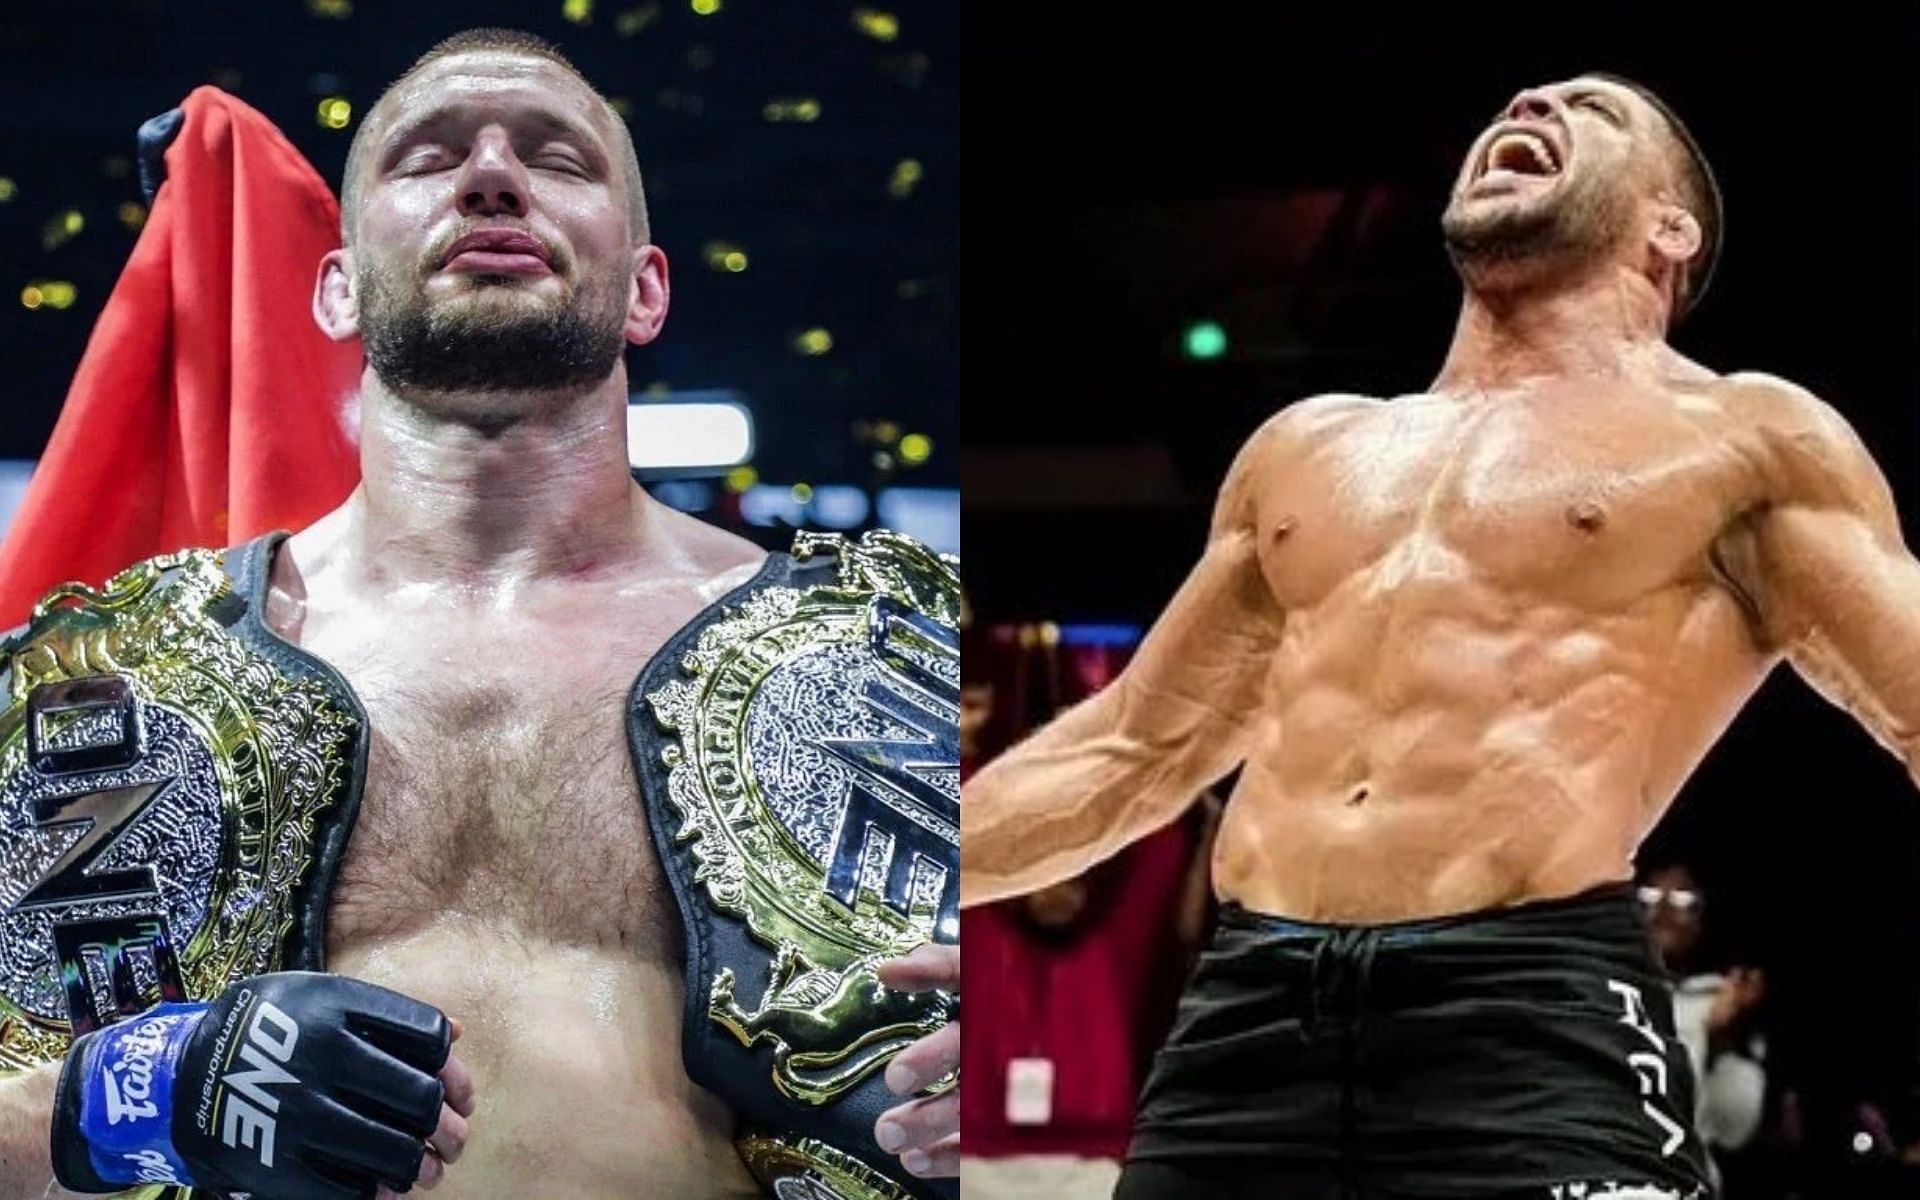 ONE Championship two-division champ Reinier De Ridder calls out Andre Galvao [Photos: Reinier De Ridder, Andre Galvao on Instagram]